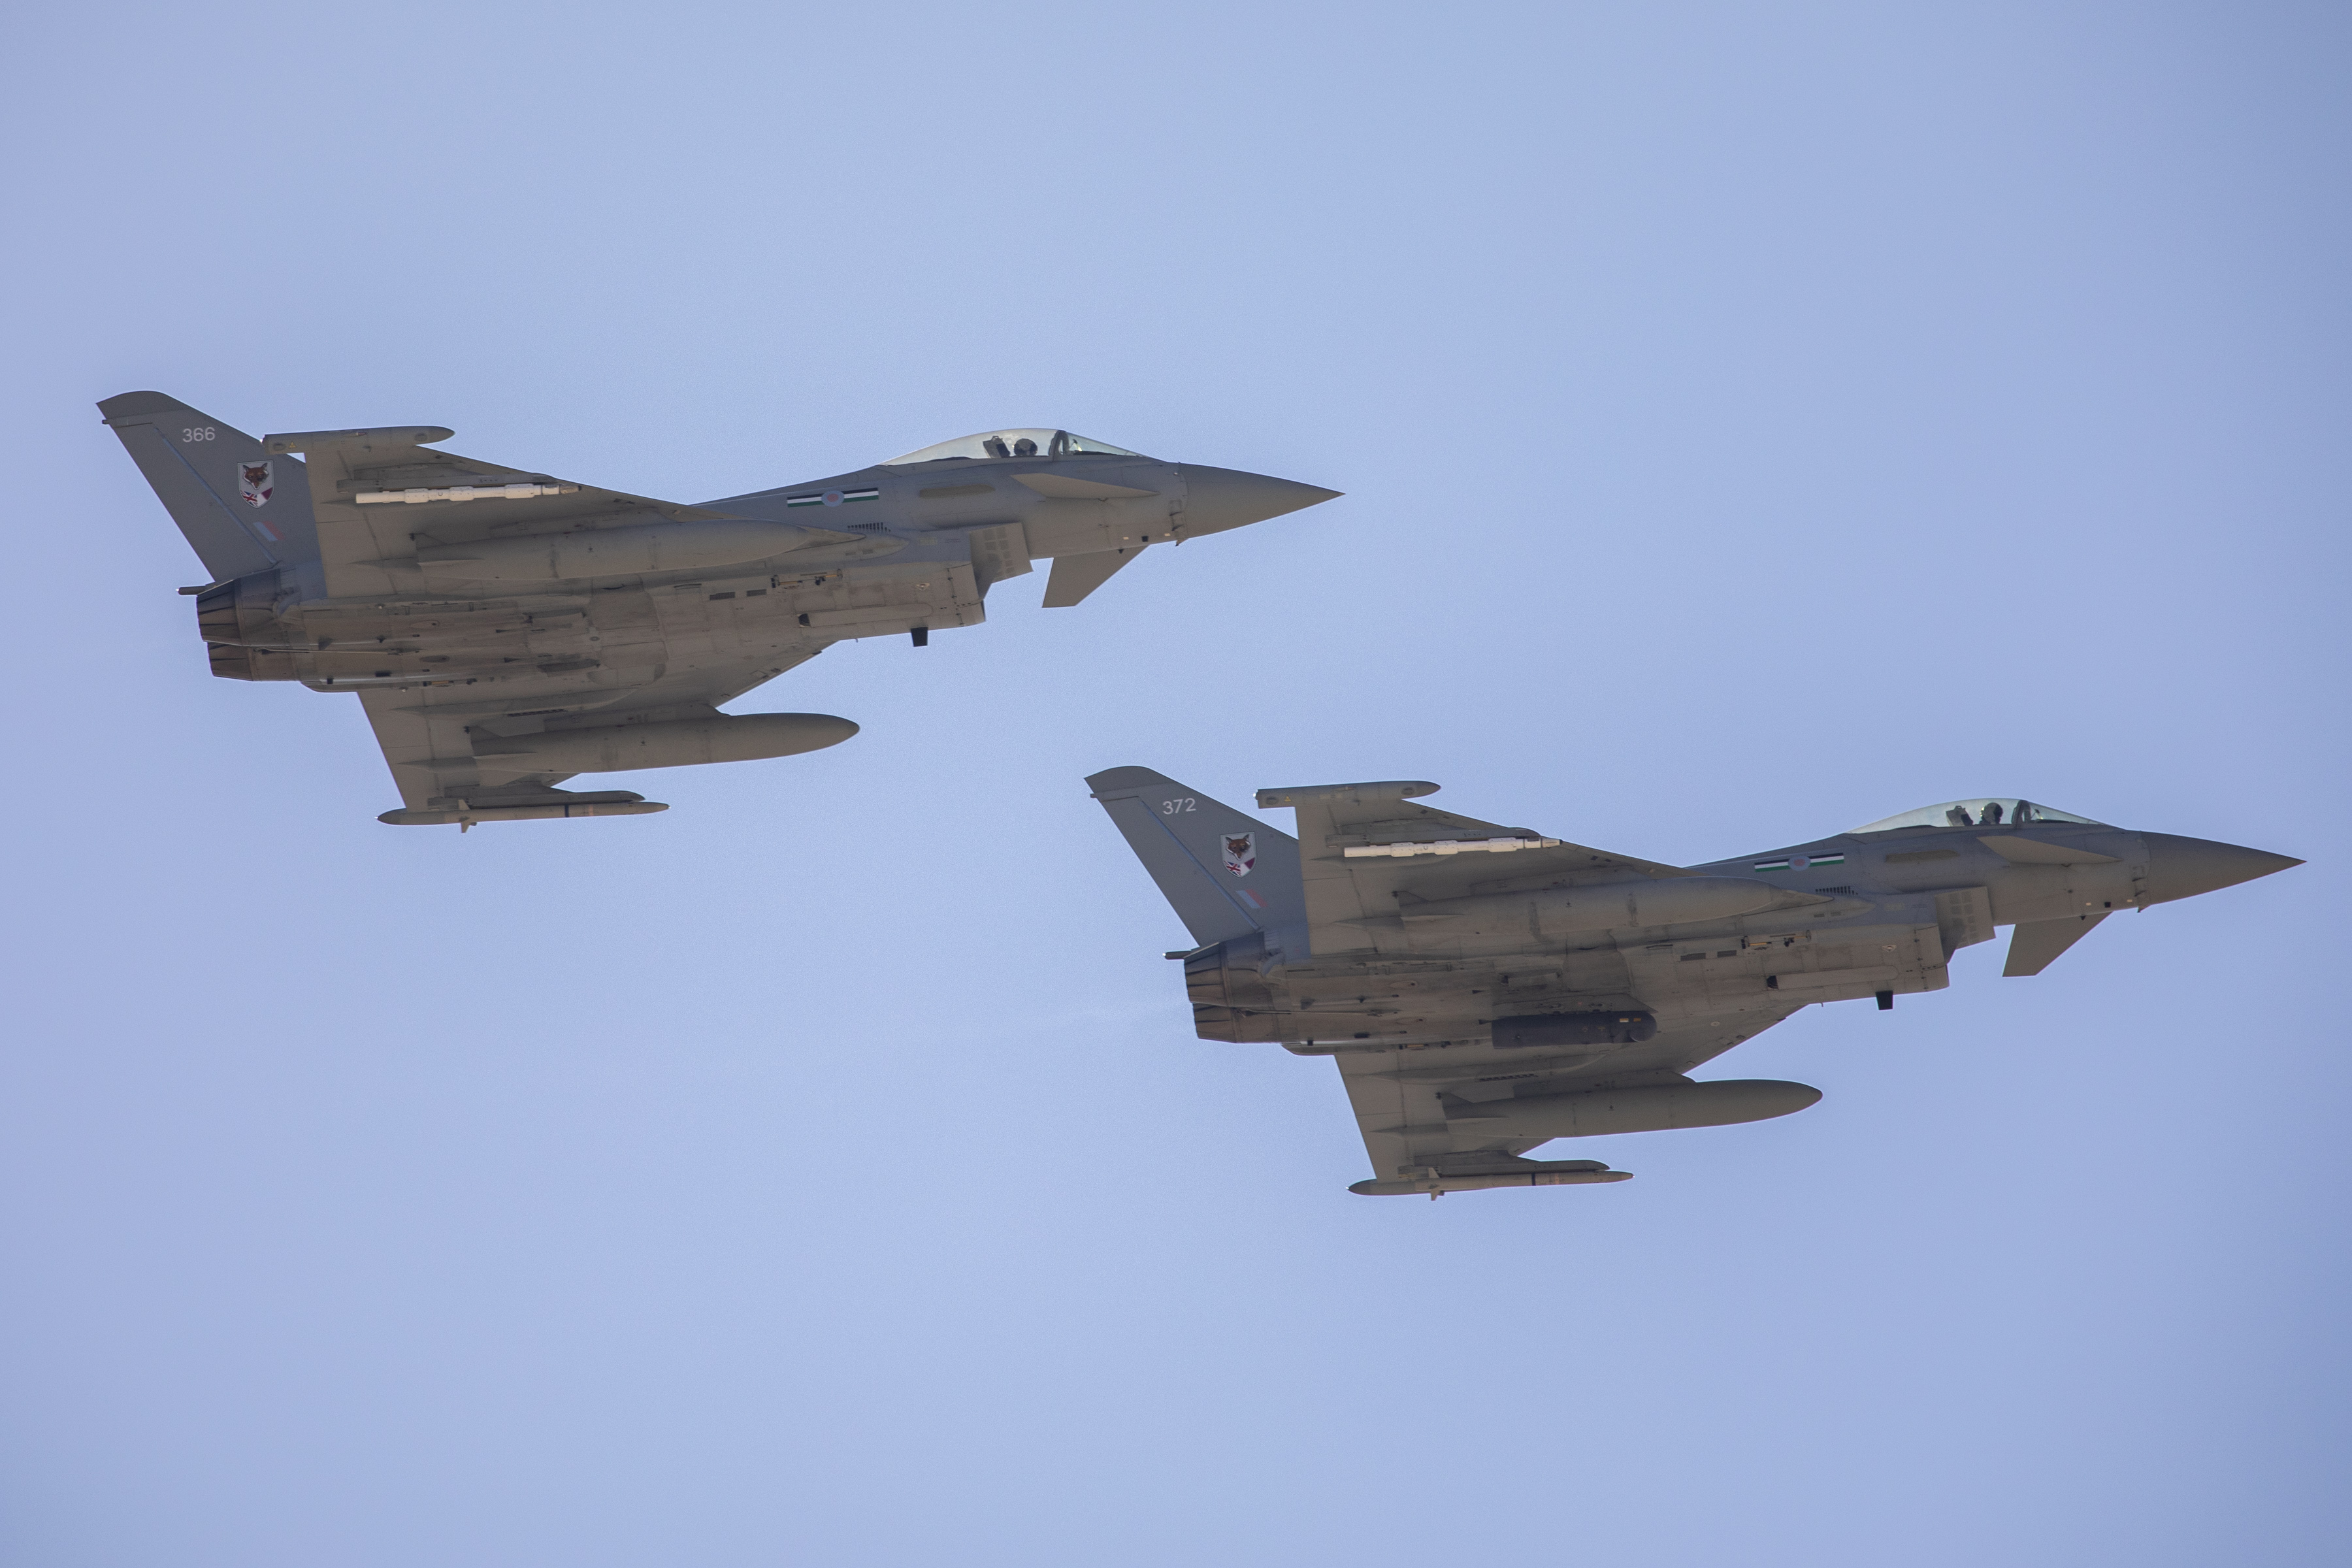 Image shows two Typhoons in flight.